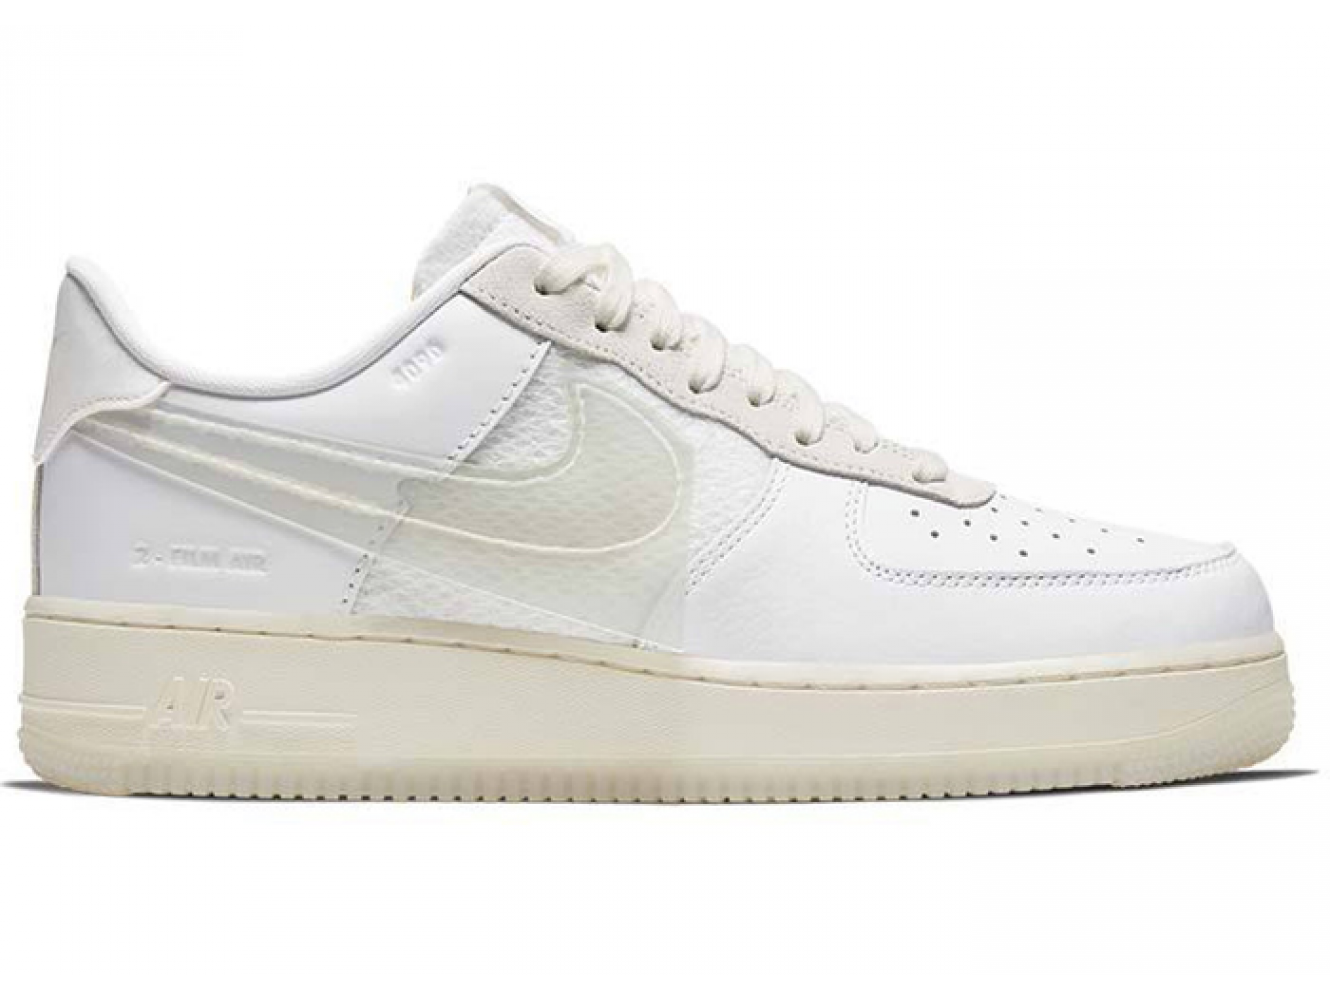 Nike Air Force 1 Low DNA White CV3040 